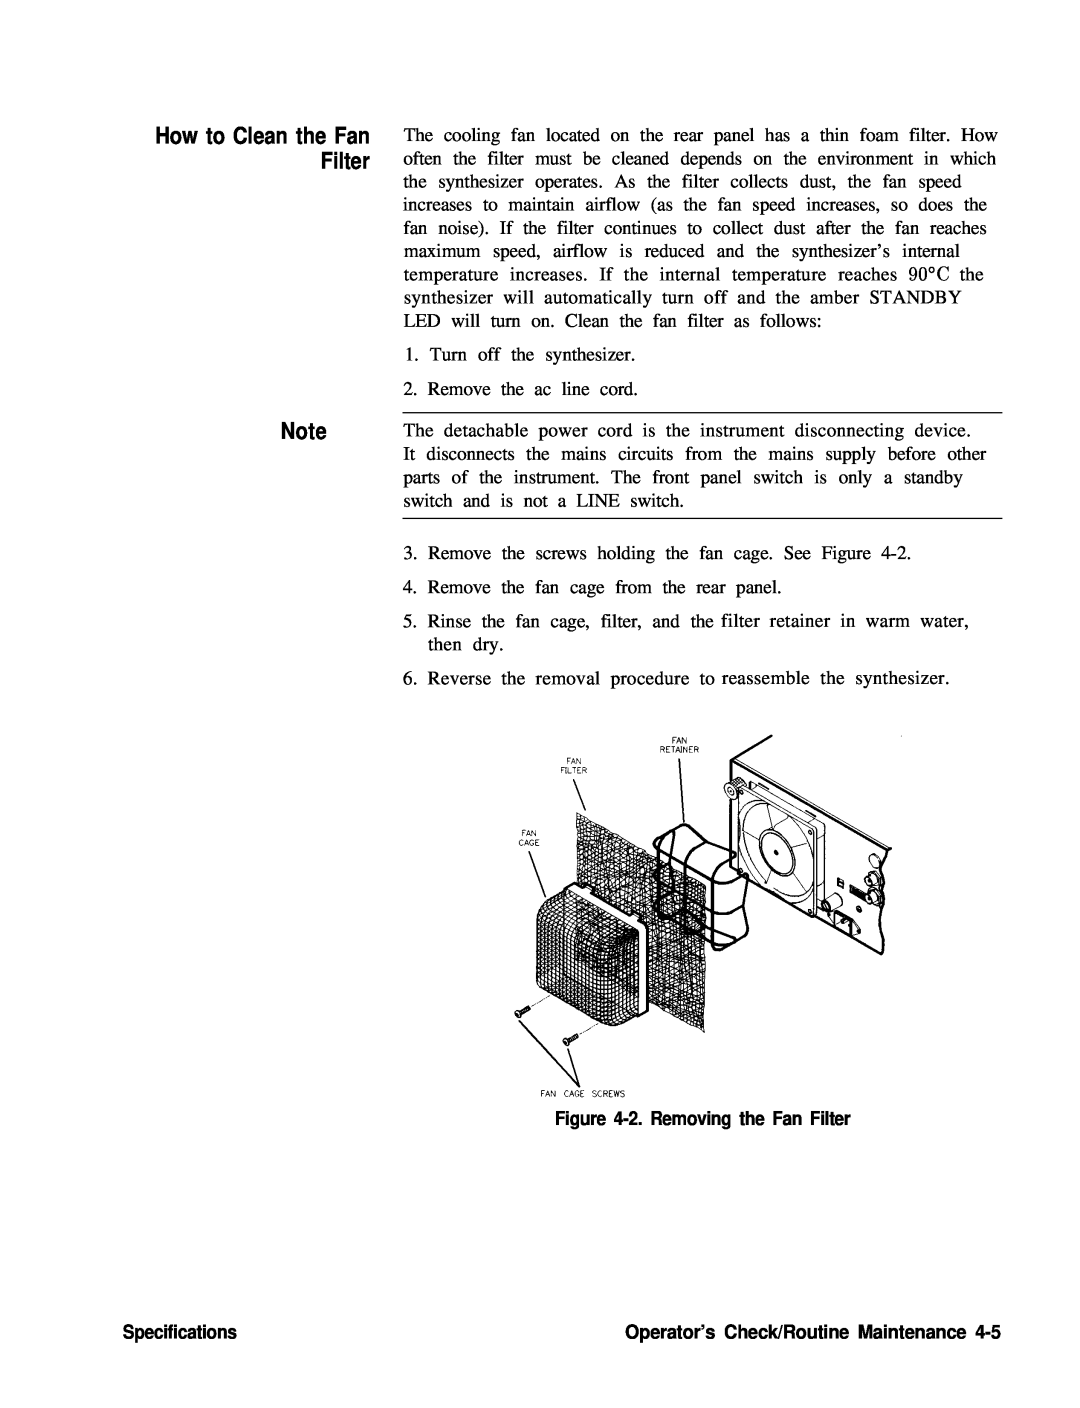 HP 22A, 83620A, 24A manual How to Clean the Fan Filter, 2. Removing the Fan Filter, Specifications, Fan Cage Screws 